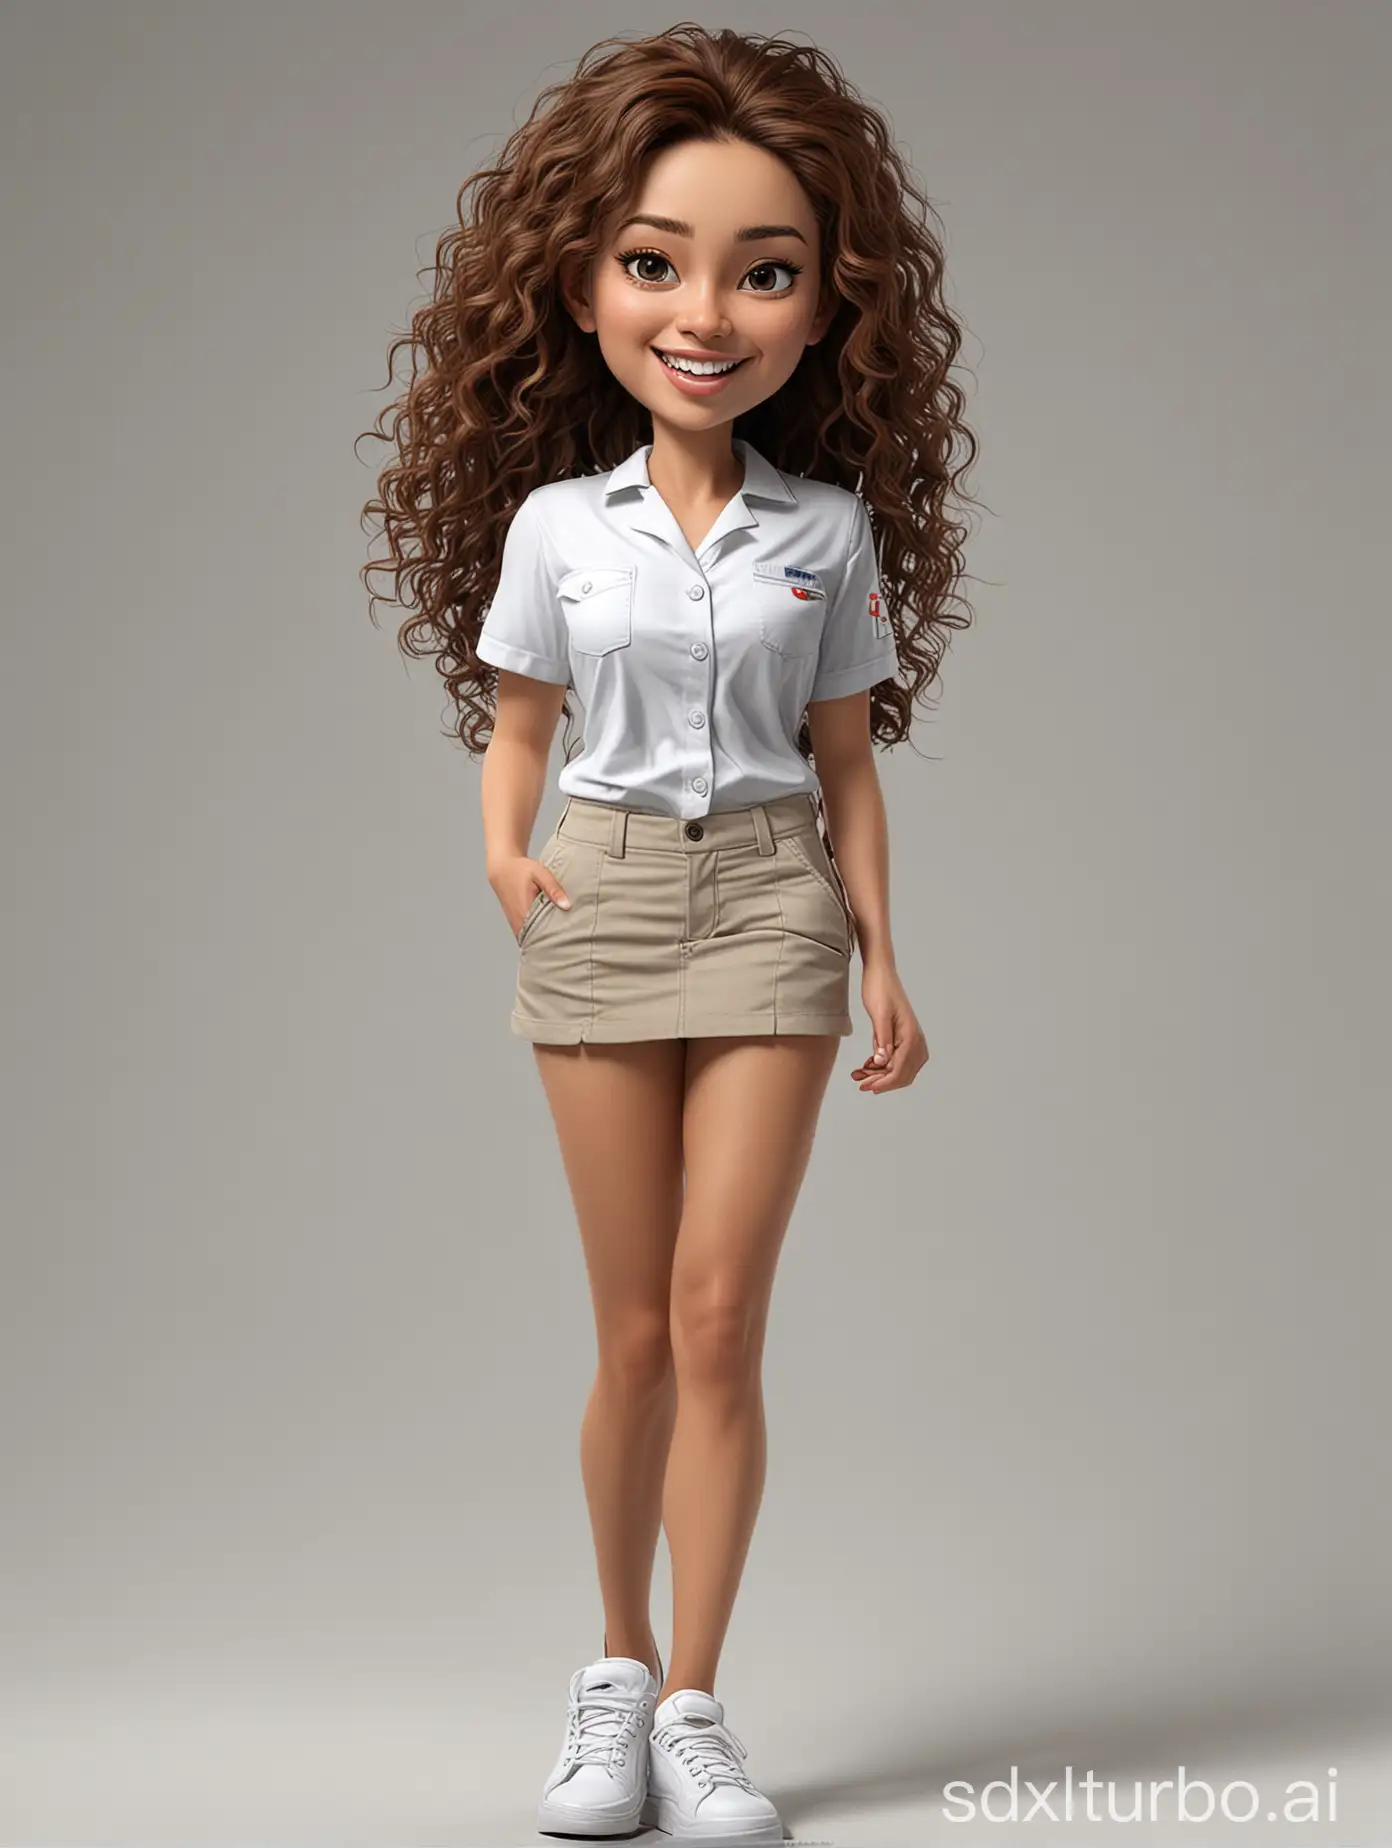 Create a full body realistic cartoon style 4D caricature with a large head. A hospital nurse, beautiful young woman, straight hair, sharp eyes, sharp nose, thick lower lip. Slight smile, open mouth. Wearing a hospital nurse uniform, white mini skirt, sneakers, next to a 40 year old man, Asian citizen. Thin, small stature. Short curly hair. Faint smile, Standing playing the guitar. Cargo pants, sneakers. Face facing straight forward, laughing expression and white background. Use soft photography lighting, hair lighting, side lighting, and top lighting. Photos with very high detail.